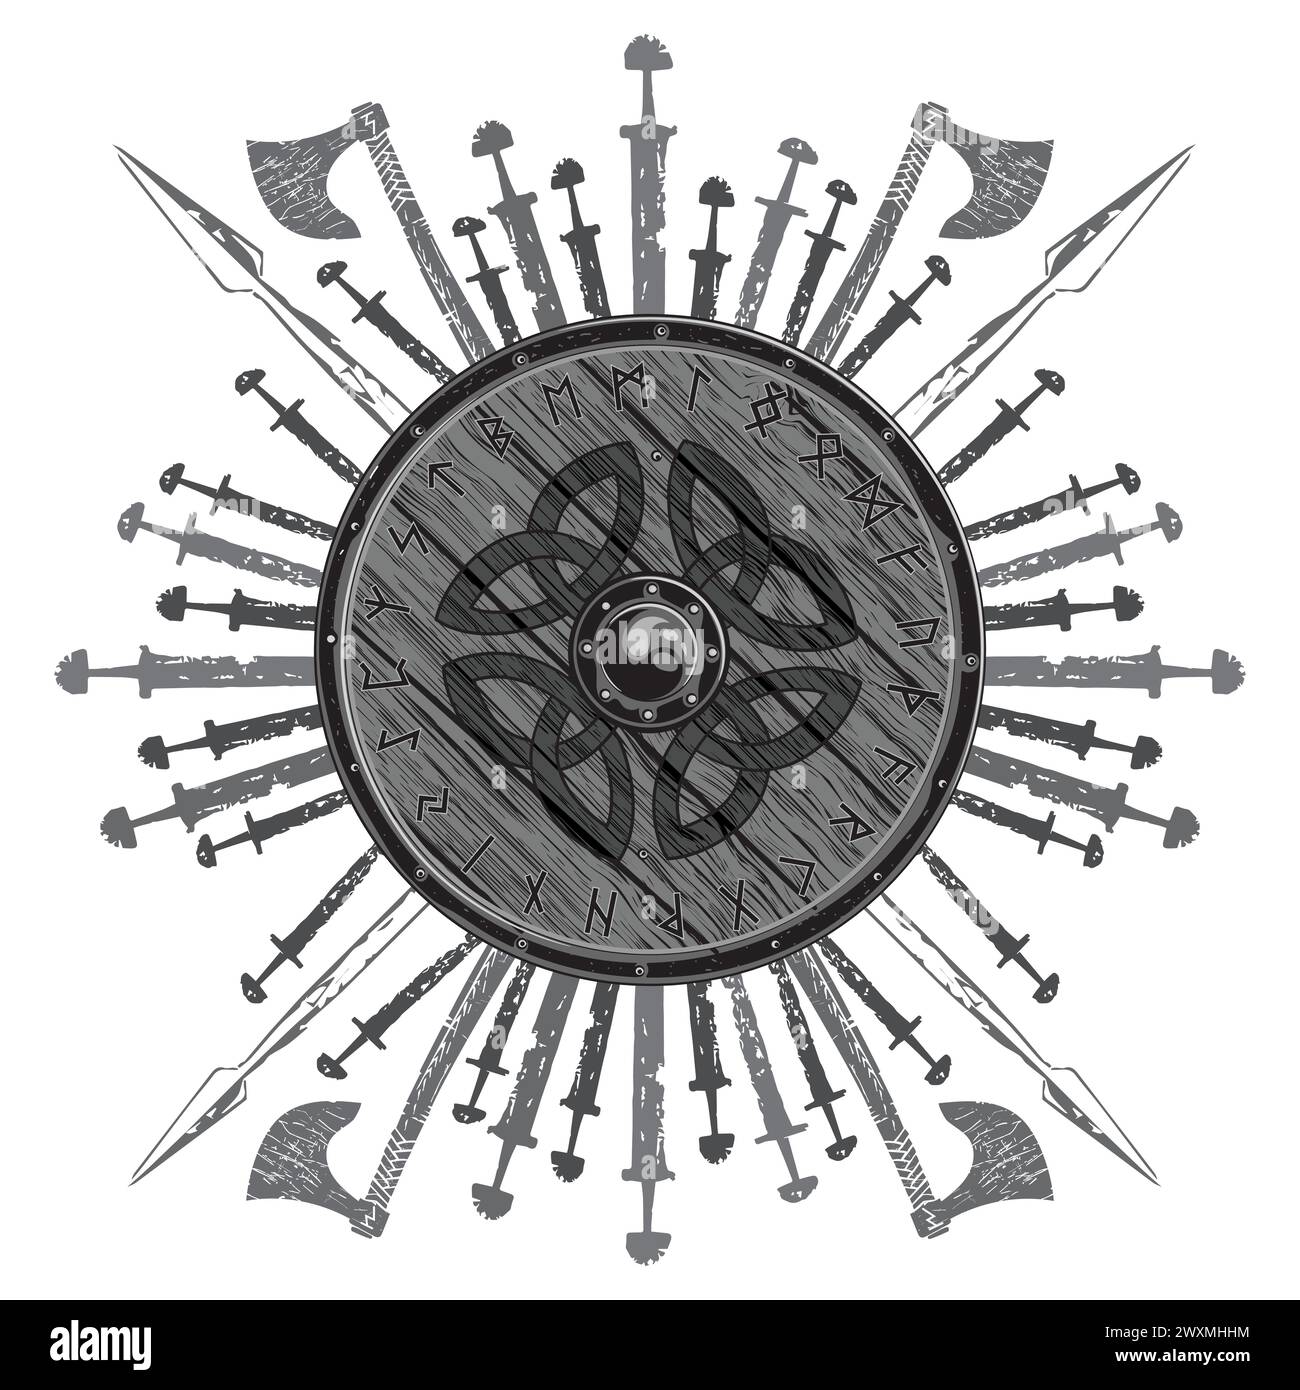 Viking design. The shield of a Viking with runes, battle axes, swords and spears Stock Vector